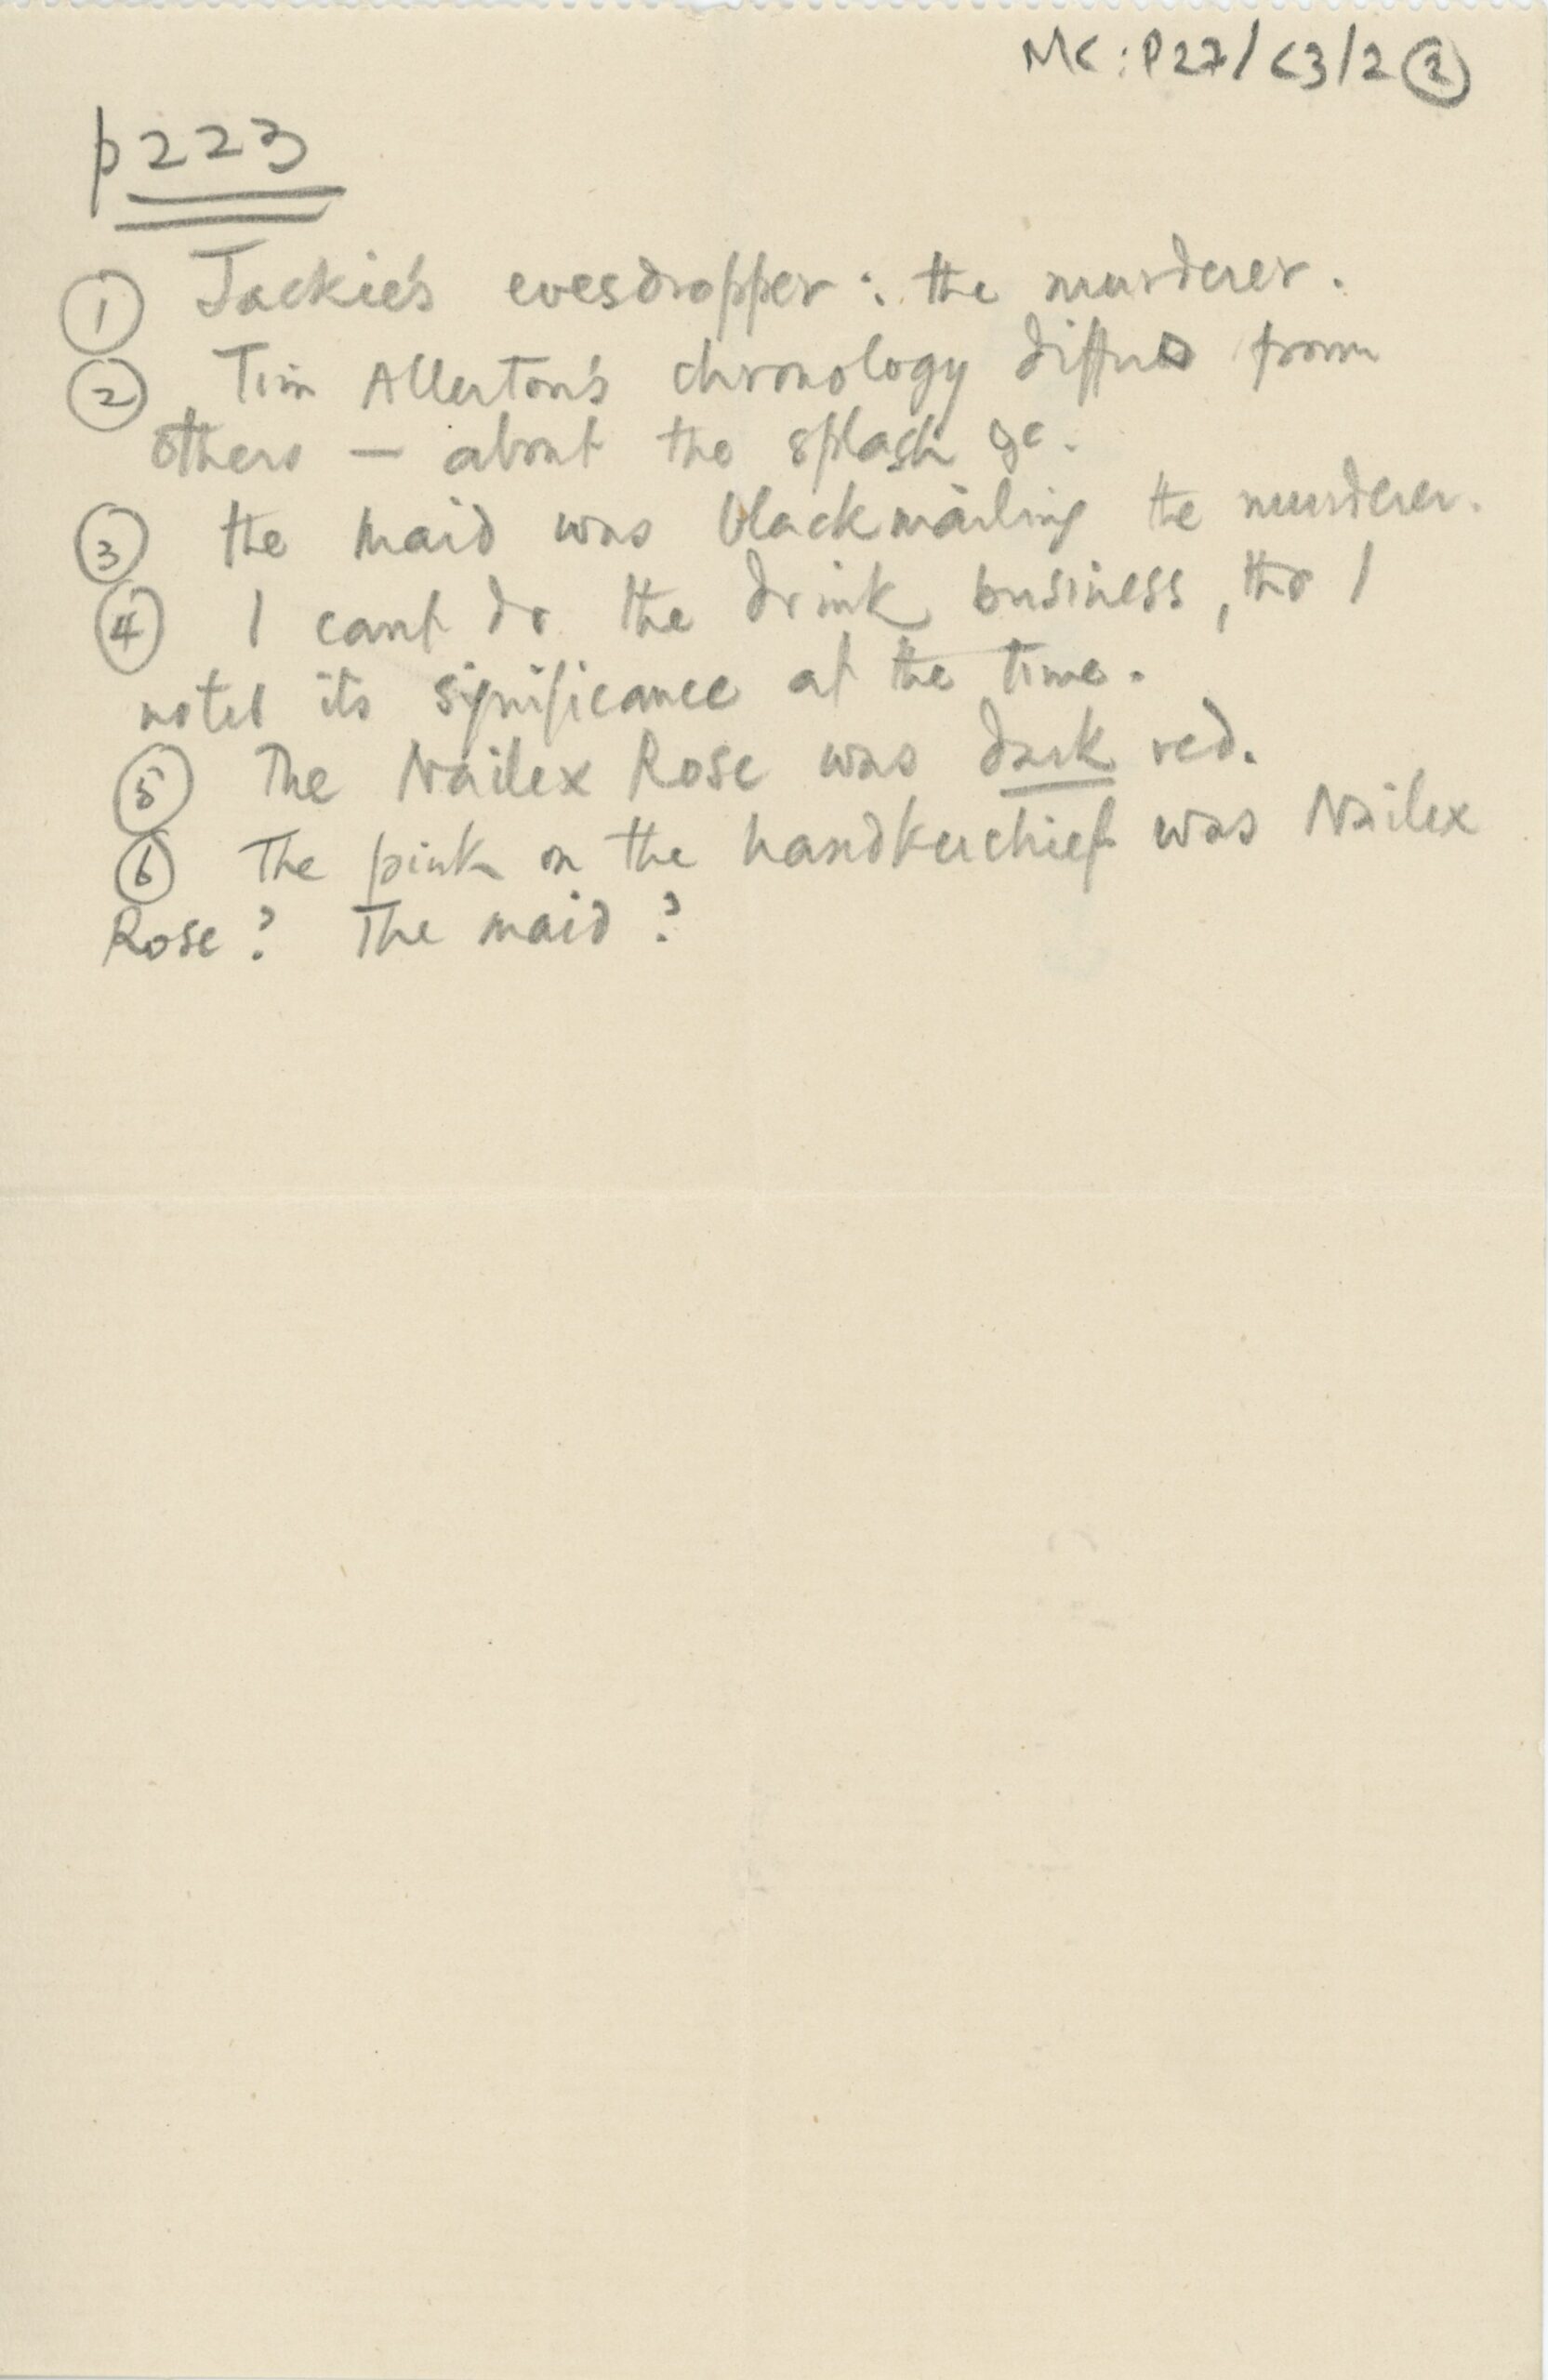 Small sheet of paper with handwritten notes in pencil. The text reads: p223 1) Jackie’s eavesdropper: the murderer. 2) Tim Allerton’s chronology differs from others – about the splash, &c. 3) the maid was blackmailing the murderer. 4) I can’t do the drink business, tho I noted its significance at the time. 5) The Nailex Rose was dark red. 6) The paint on the handkerchief was Nailex Rose? The maid?